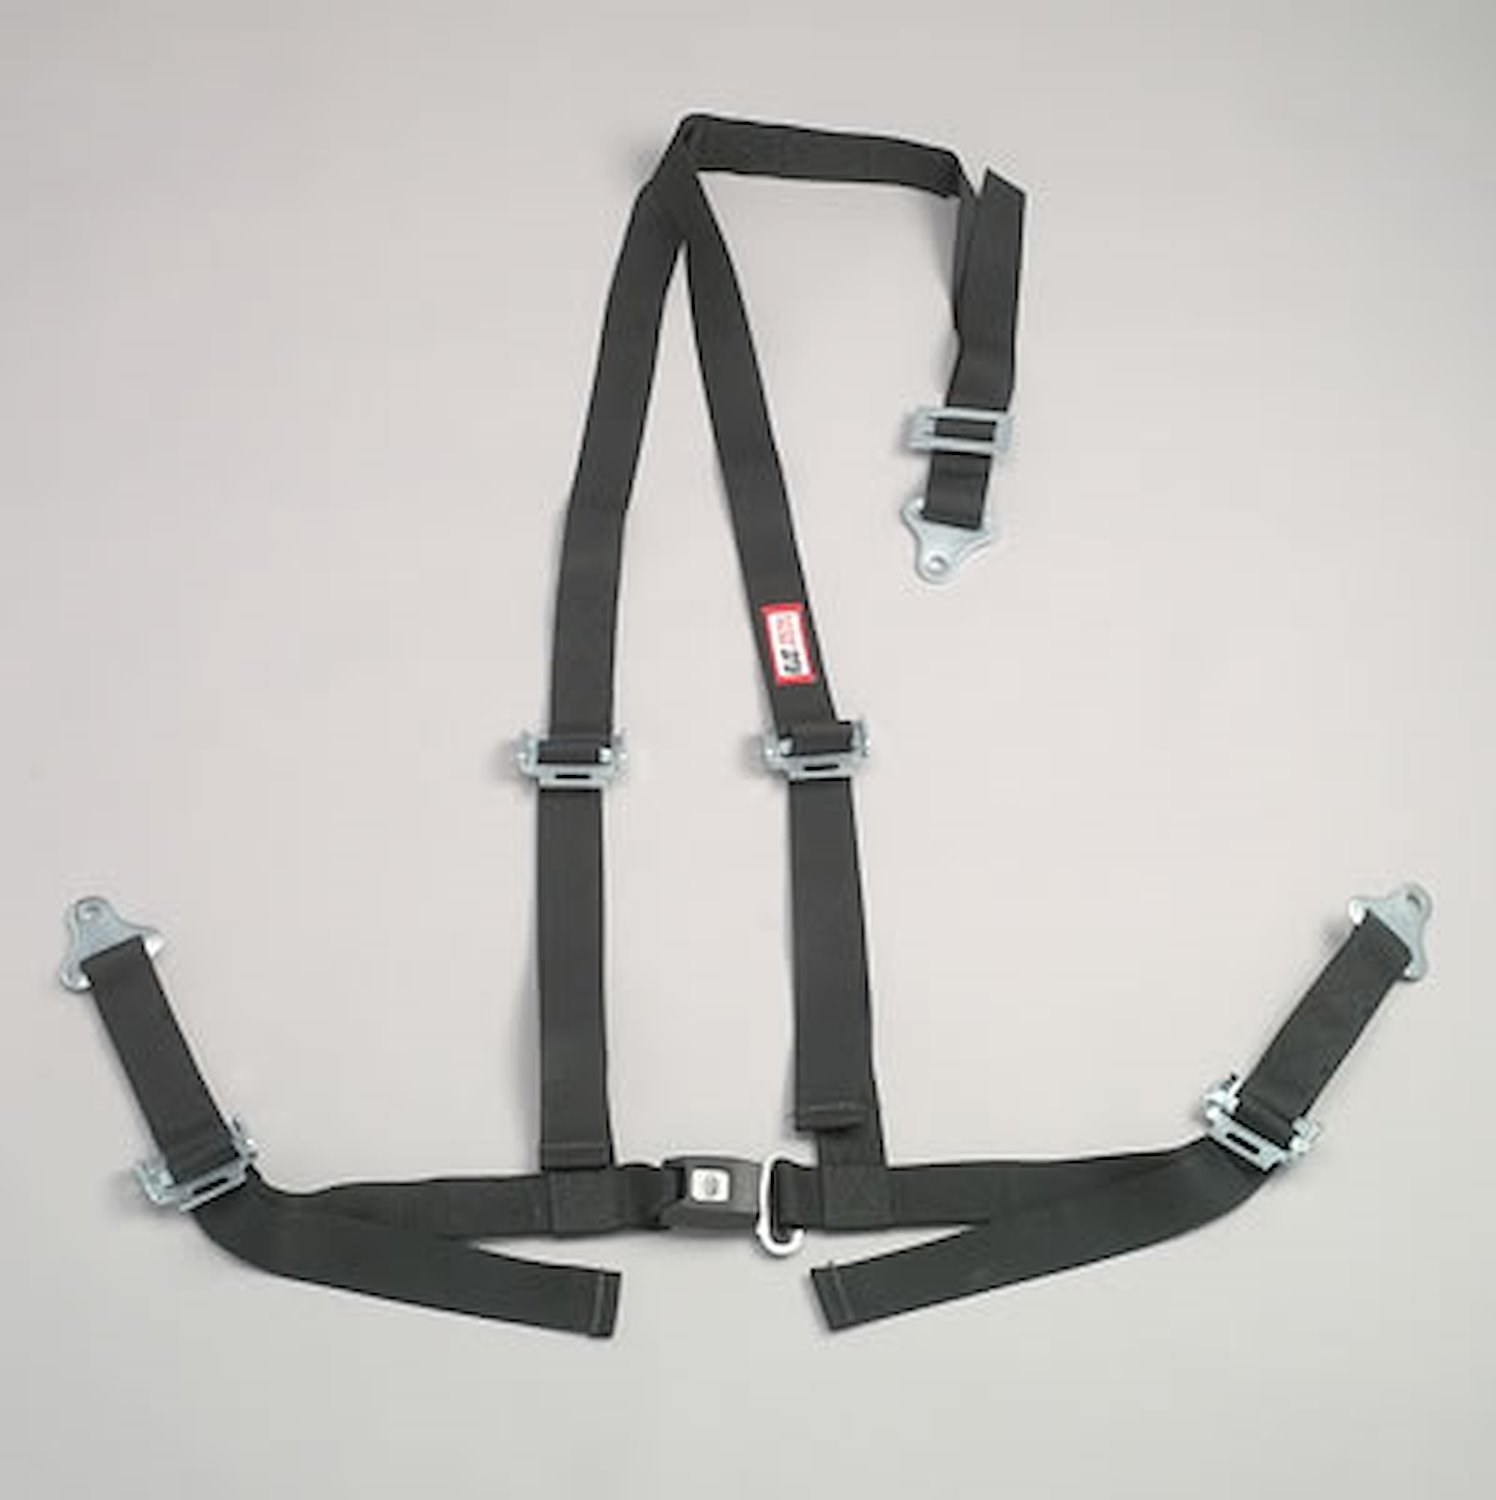 NON-SFI B&T HARNESS 2 PULL UP Lap Belt SNAP 2 S. H. Y FLOOR Mount WRAP/SNAP RED